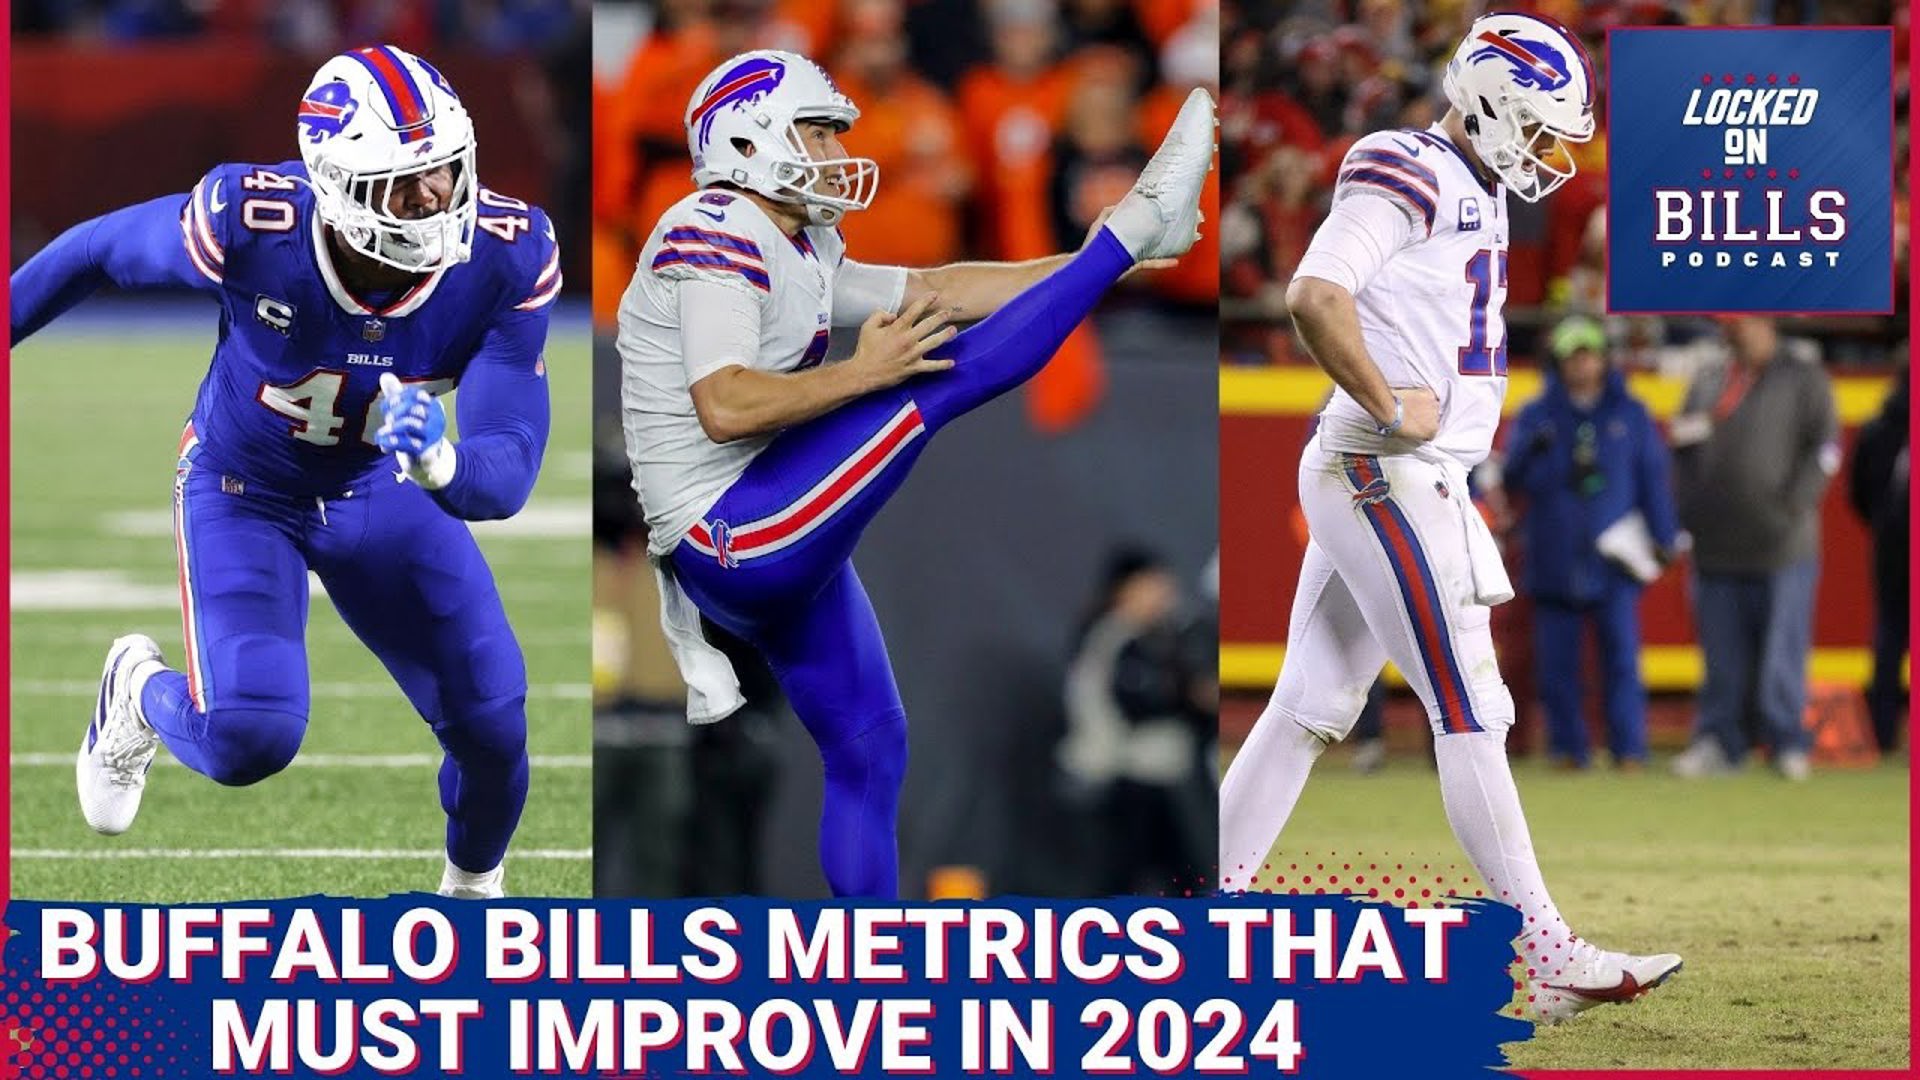 Metrics that must improve for the Buffalo Bills to have even more success in 2024